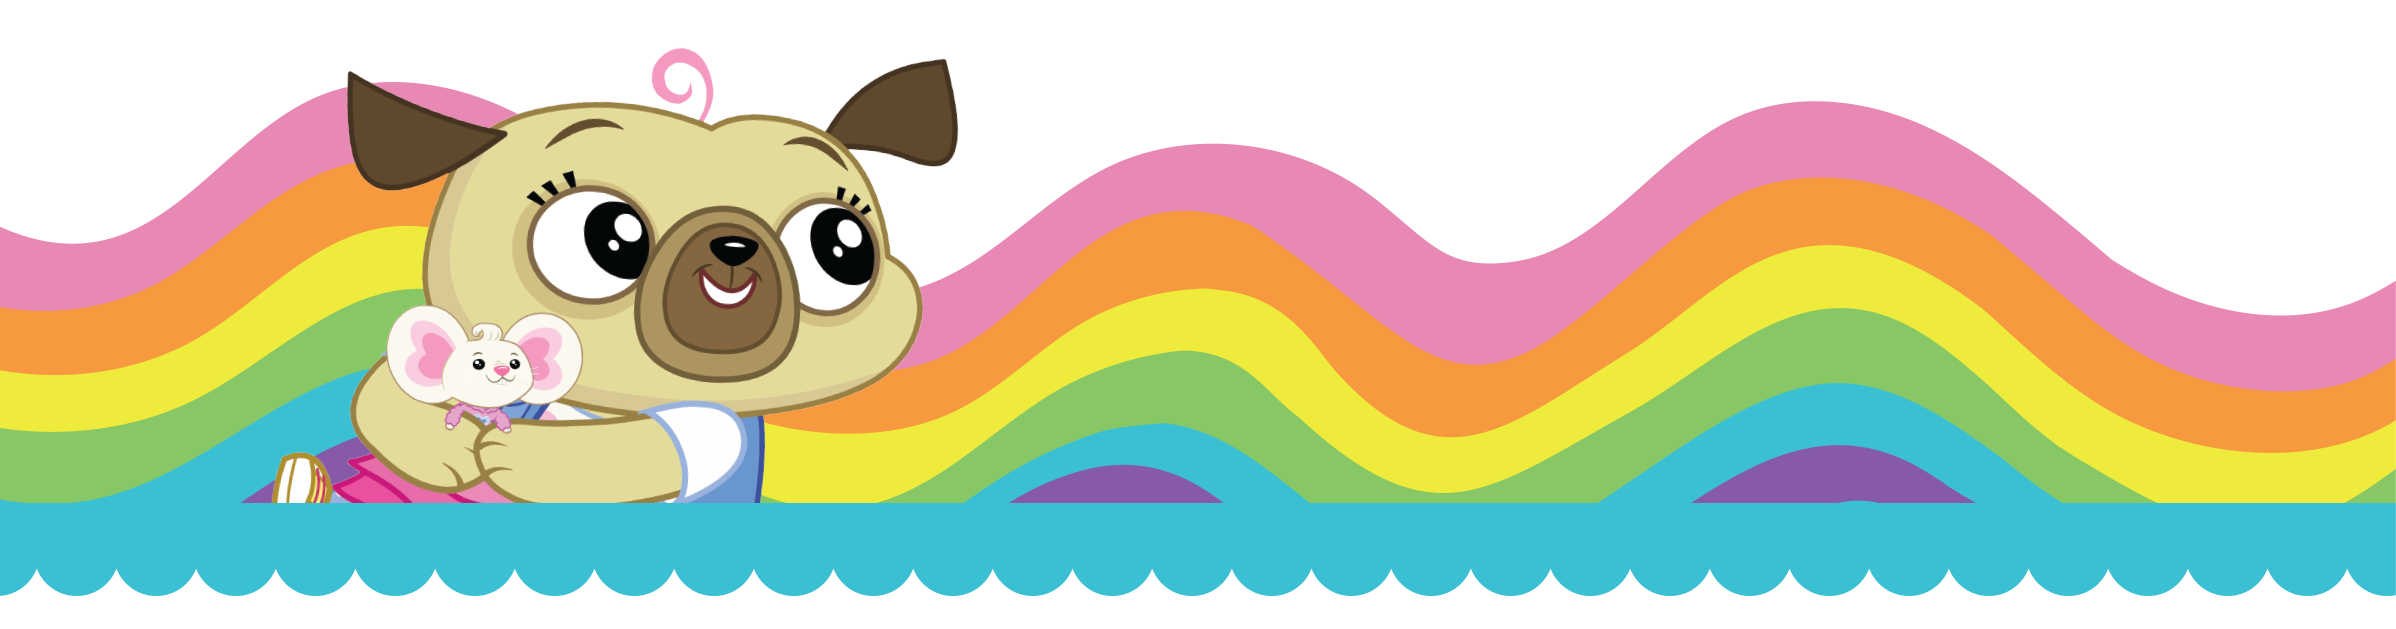 A cute, beige pug holding a tiny, white mouse in her hands in front of a rainbow background.